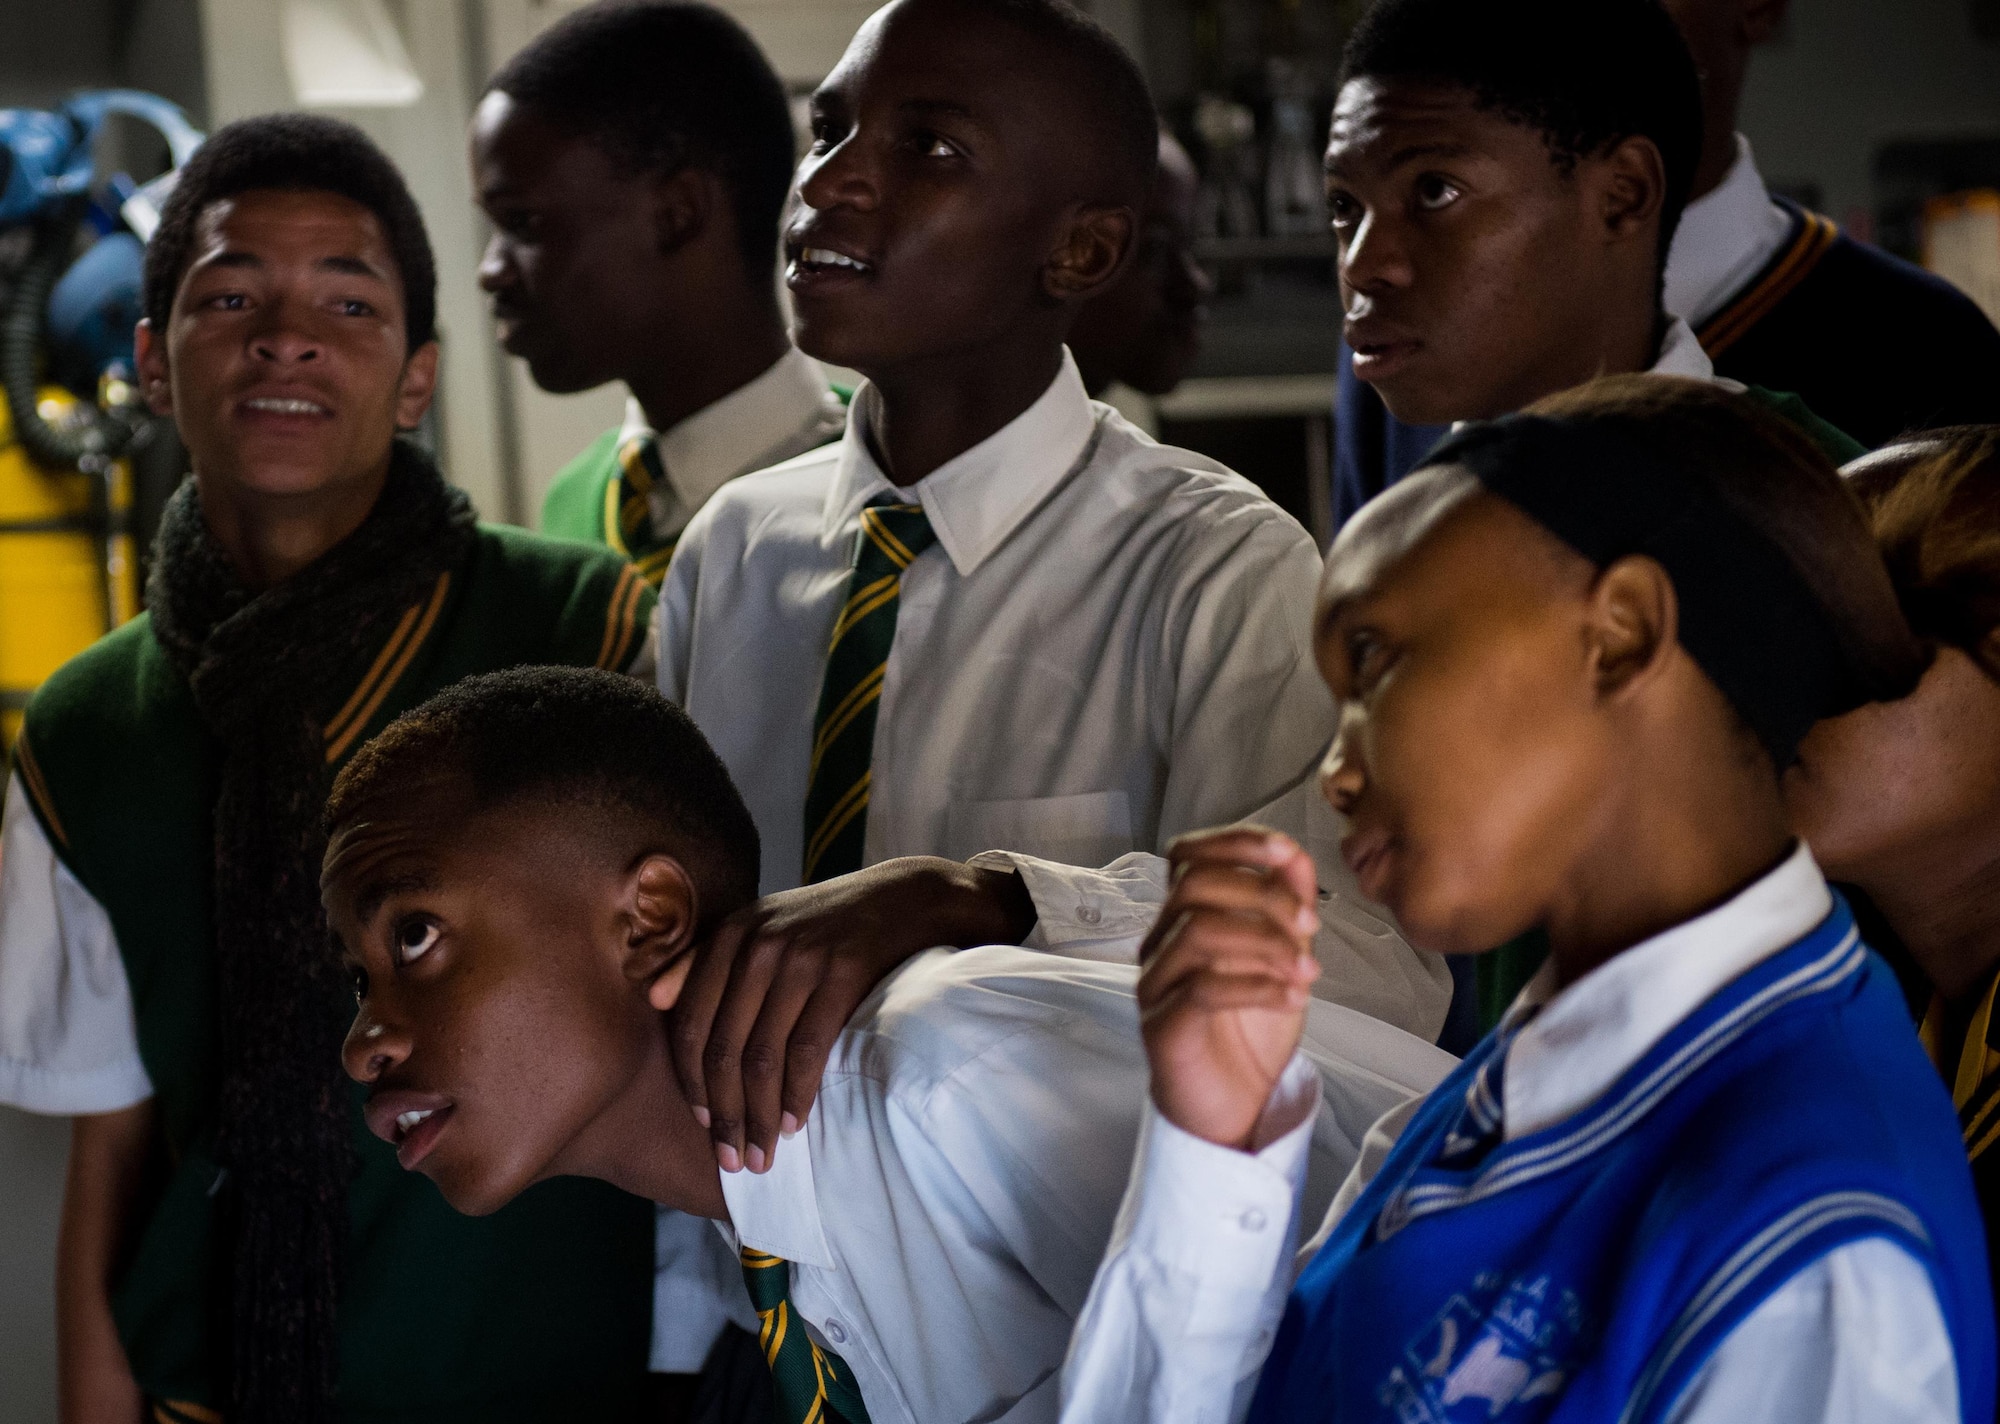 South African students anxiously wait to sit in the cockpit of a C-17 Globemaster III at the African Aerospace and Defense Expo at Waterkloof Air Force Base, South Africa, Sept. 14, 2016. The U.S. military is exhibiting a C-17 Globemaster III, a KC-135 Stratotanker, a C-130J Super Hercules, an HC-130 King, and an MQ-9 Reaper. The aircraft come from various Air National Guard and Air Force Reserve Command units. The U.S. routinely participates in events like AADE to strengthen partnerships with regional partners. (U.S. Air Force photo by Tech. Sgt. Ryan Crane)